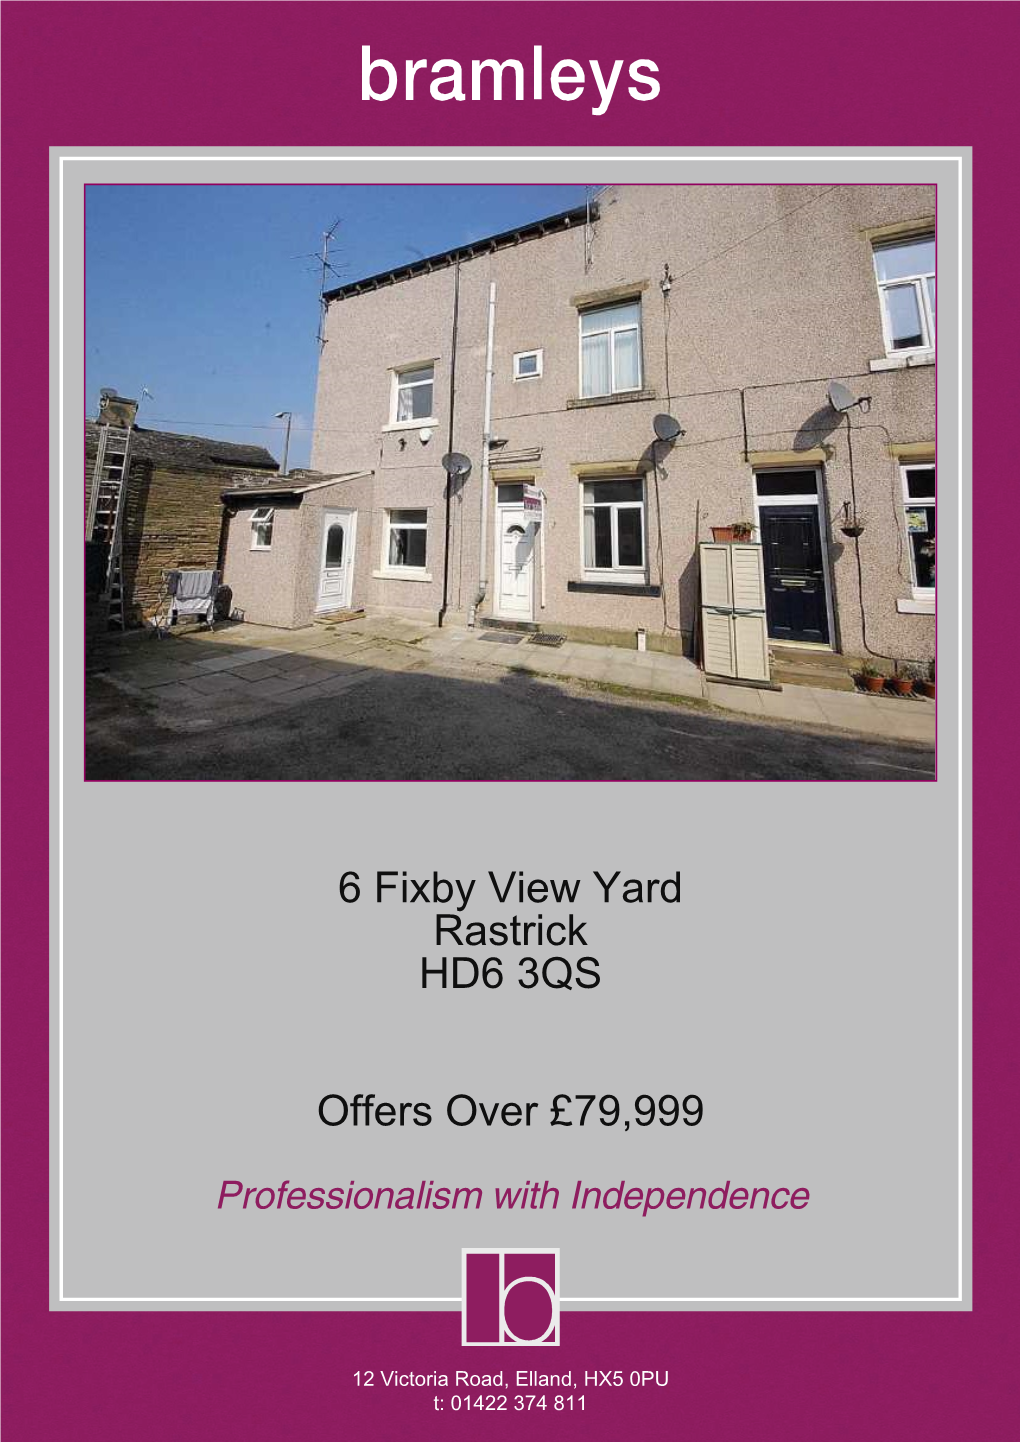 6 Fixby View Yard Rastrick HD6 3QS Offers Over £79,999